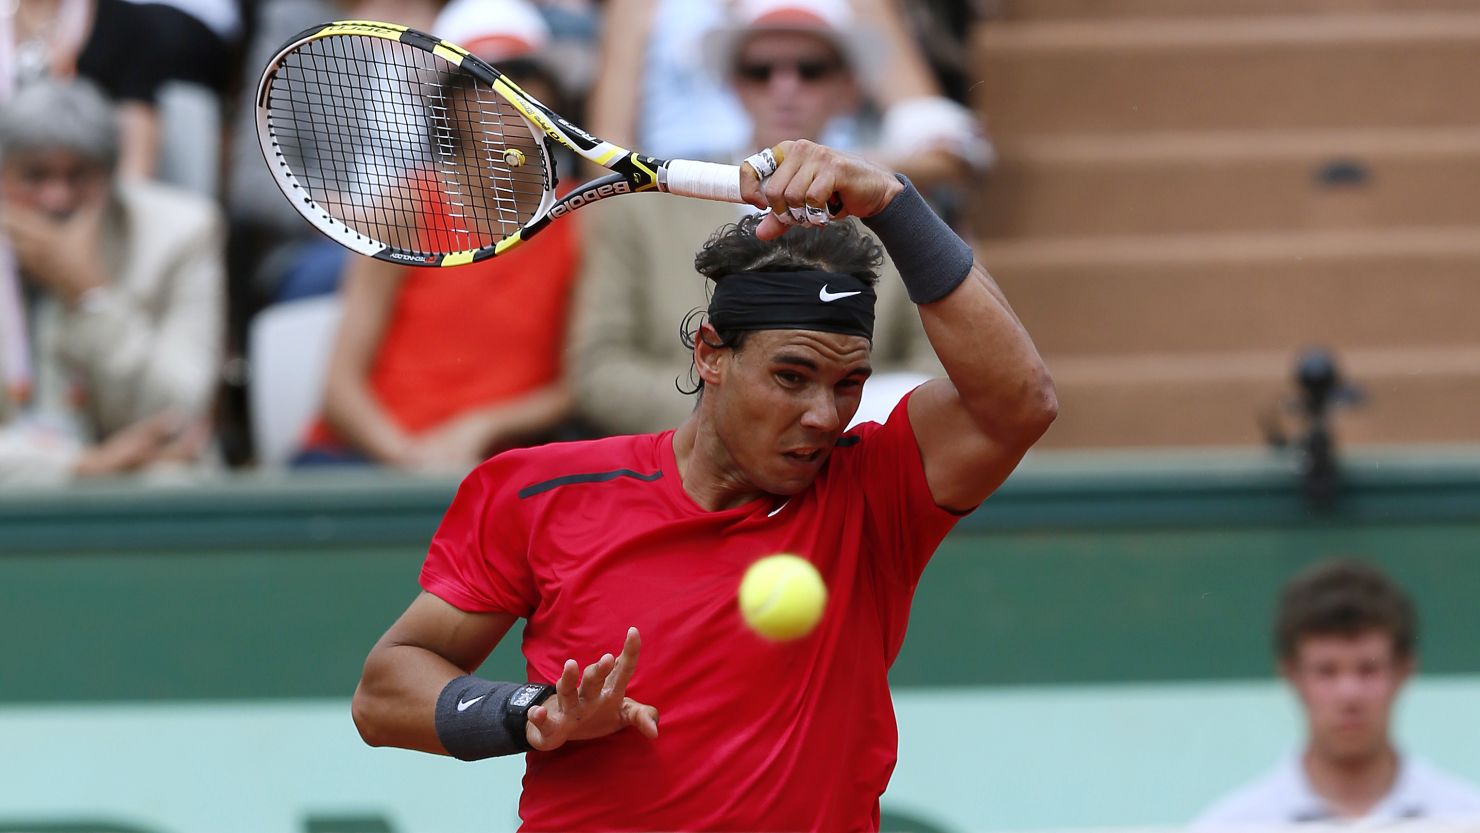 Spanish world No. 2 Rafael Nadal is looking for a record seventh title at Roland Garros.